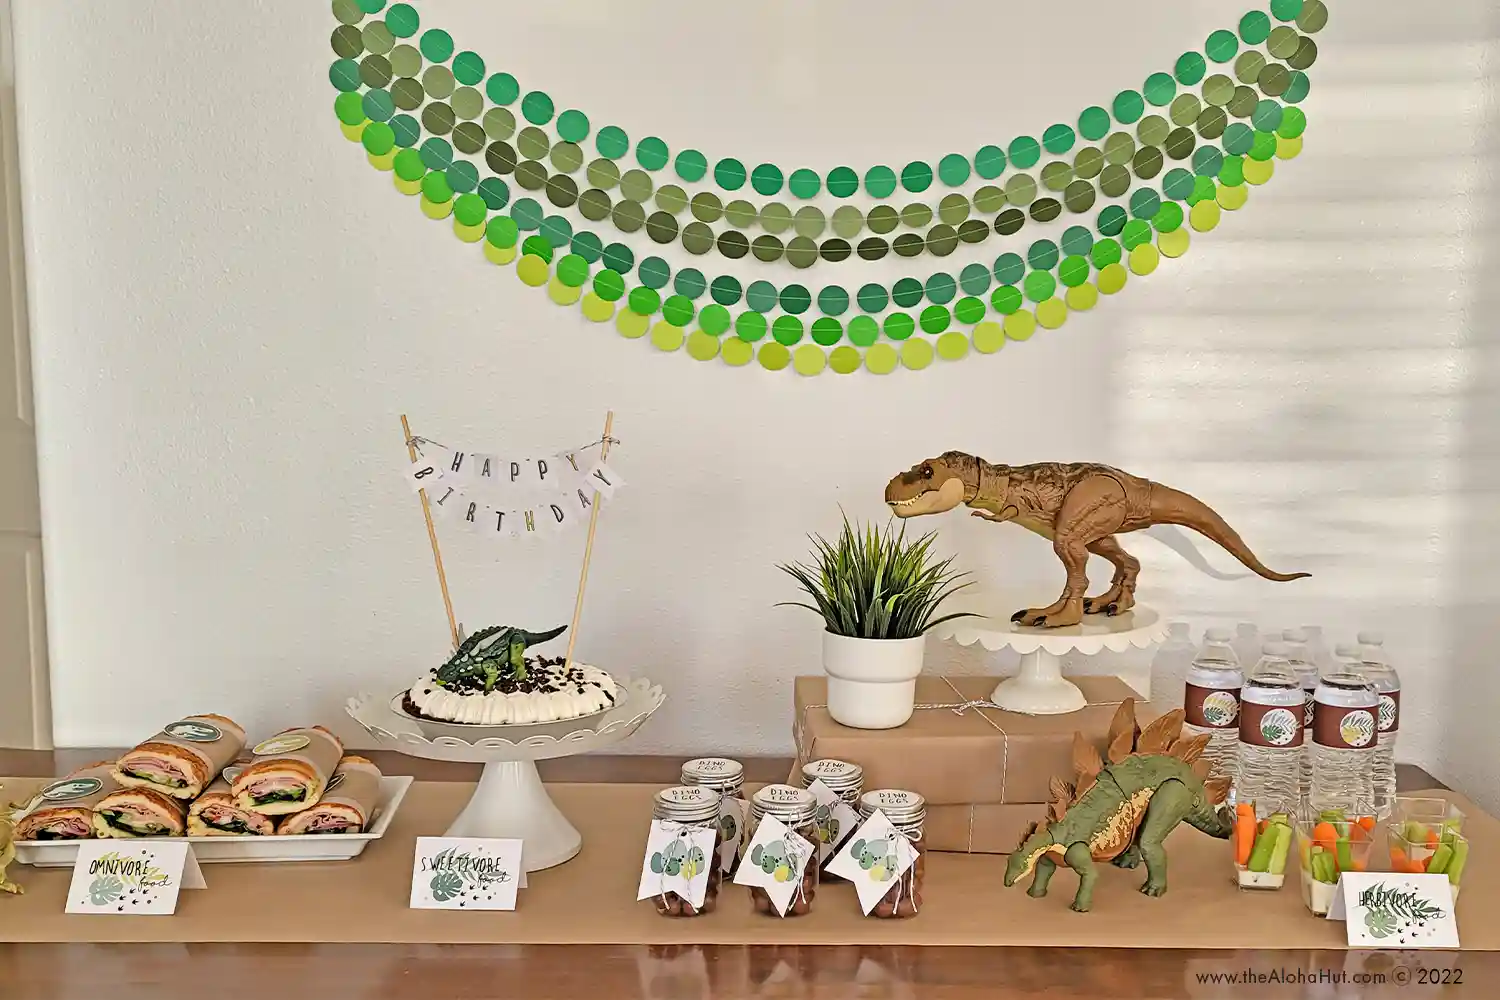 Jurassic World Camp Cretaceous Party Ideas - Dinosaur Party Ideas - free printable party decor & games - party table